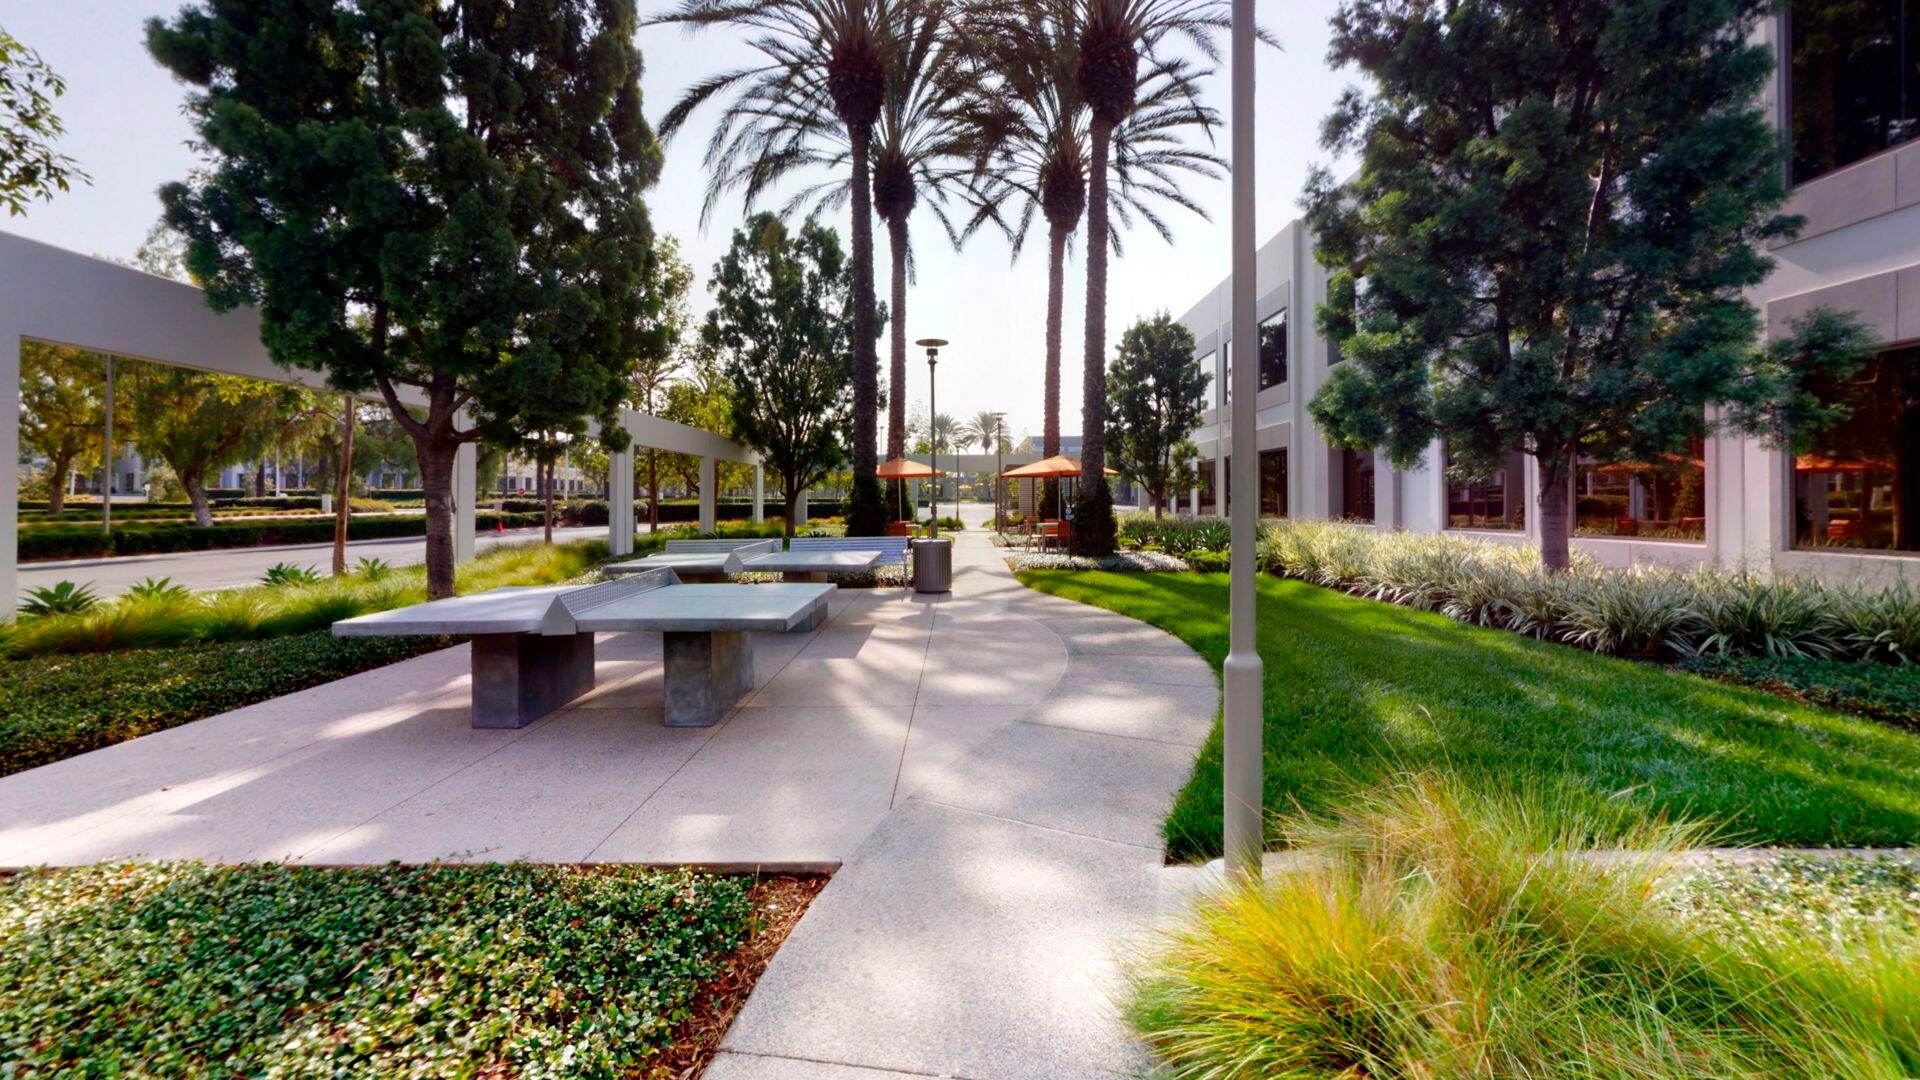 Exterior photography of Outdoor Workspac330 Commerce at Market Place Center, Irvine CA.